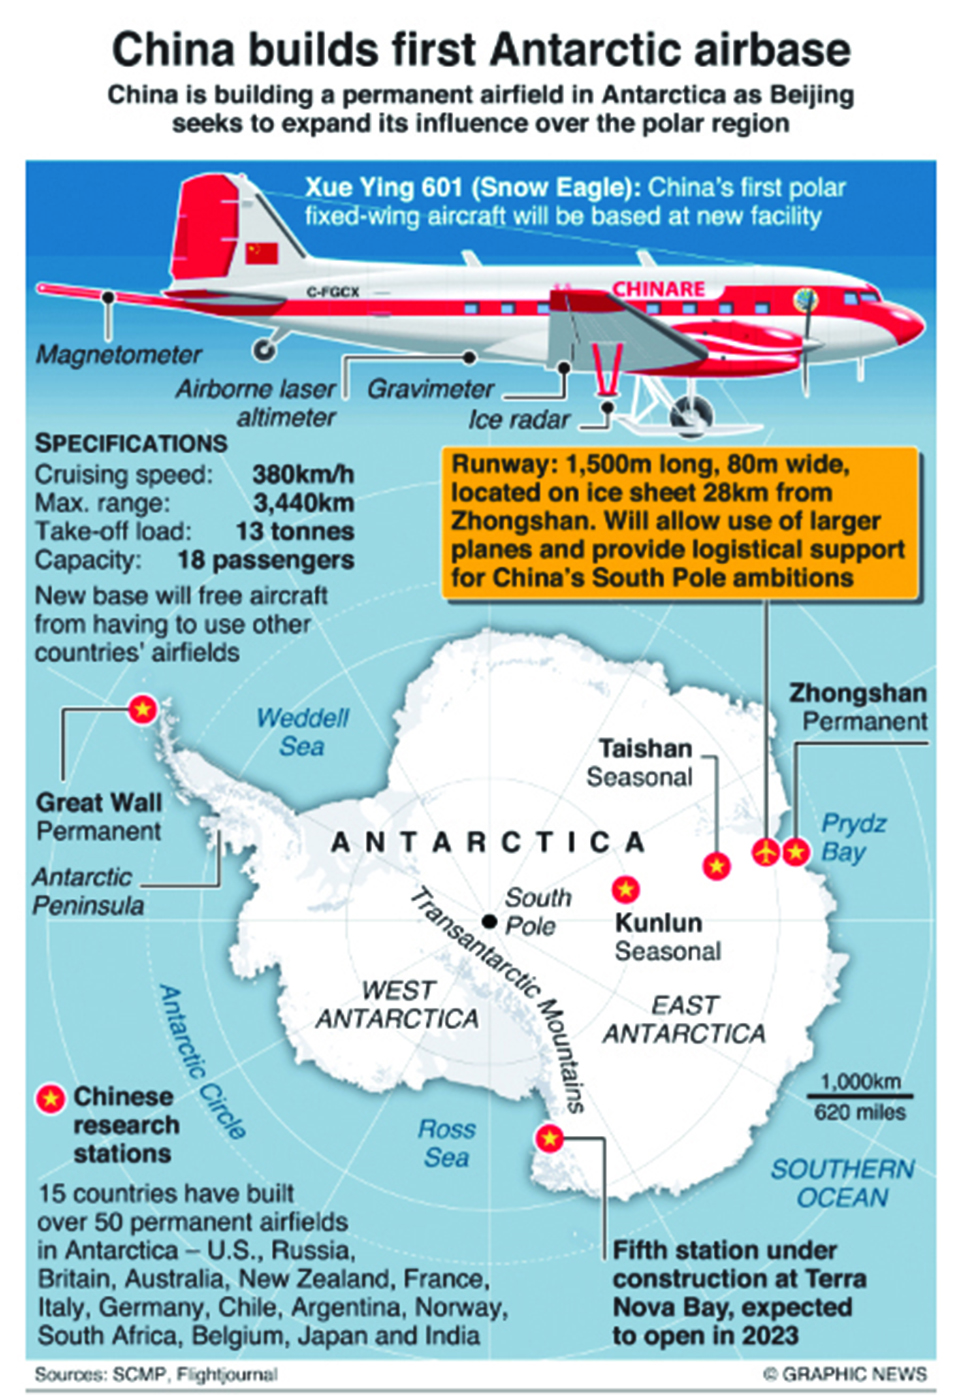 Infographic: China builds permanent airfield in Antarctic